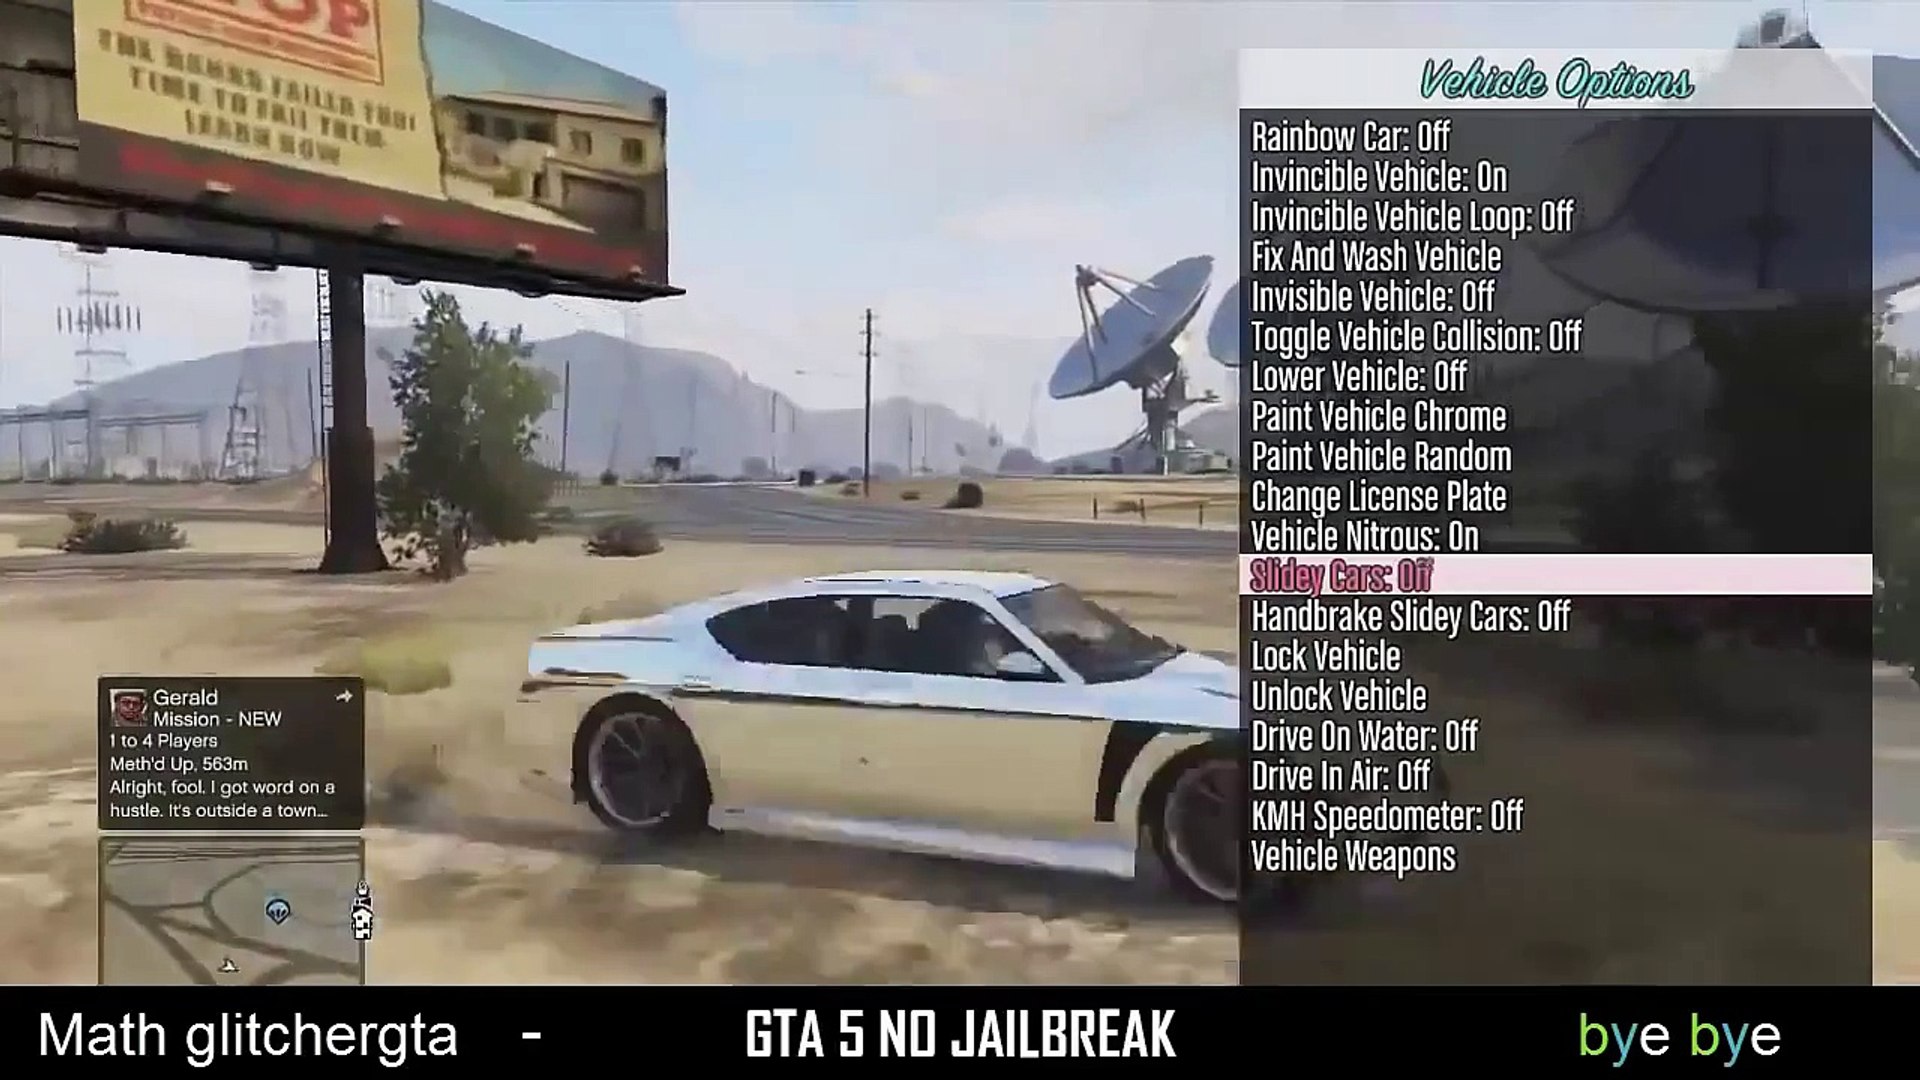 Gta 5 Online Free Dns Codes And Modz Menu After Patch 1 22 1 24 Hd Video Dailymotion